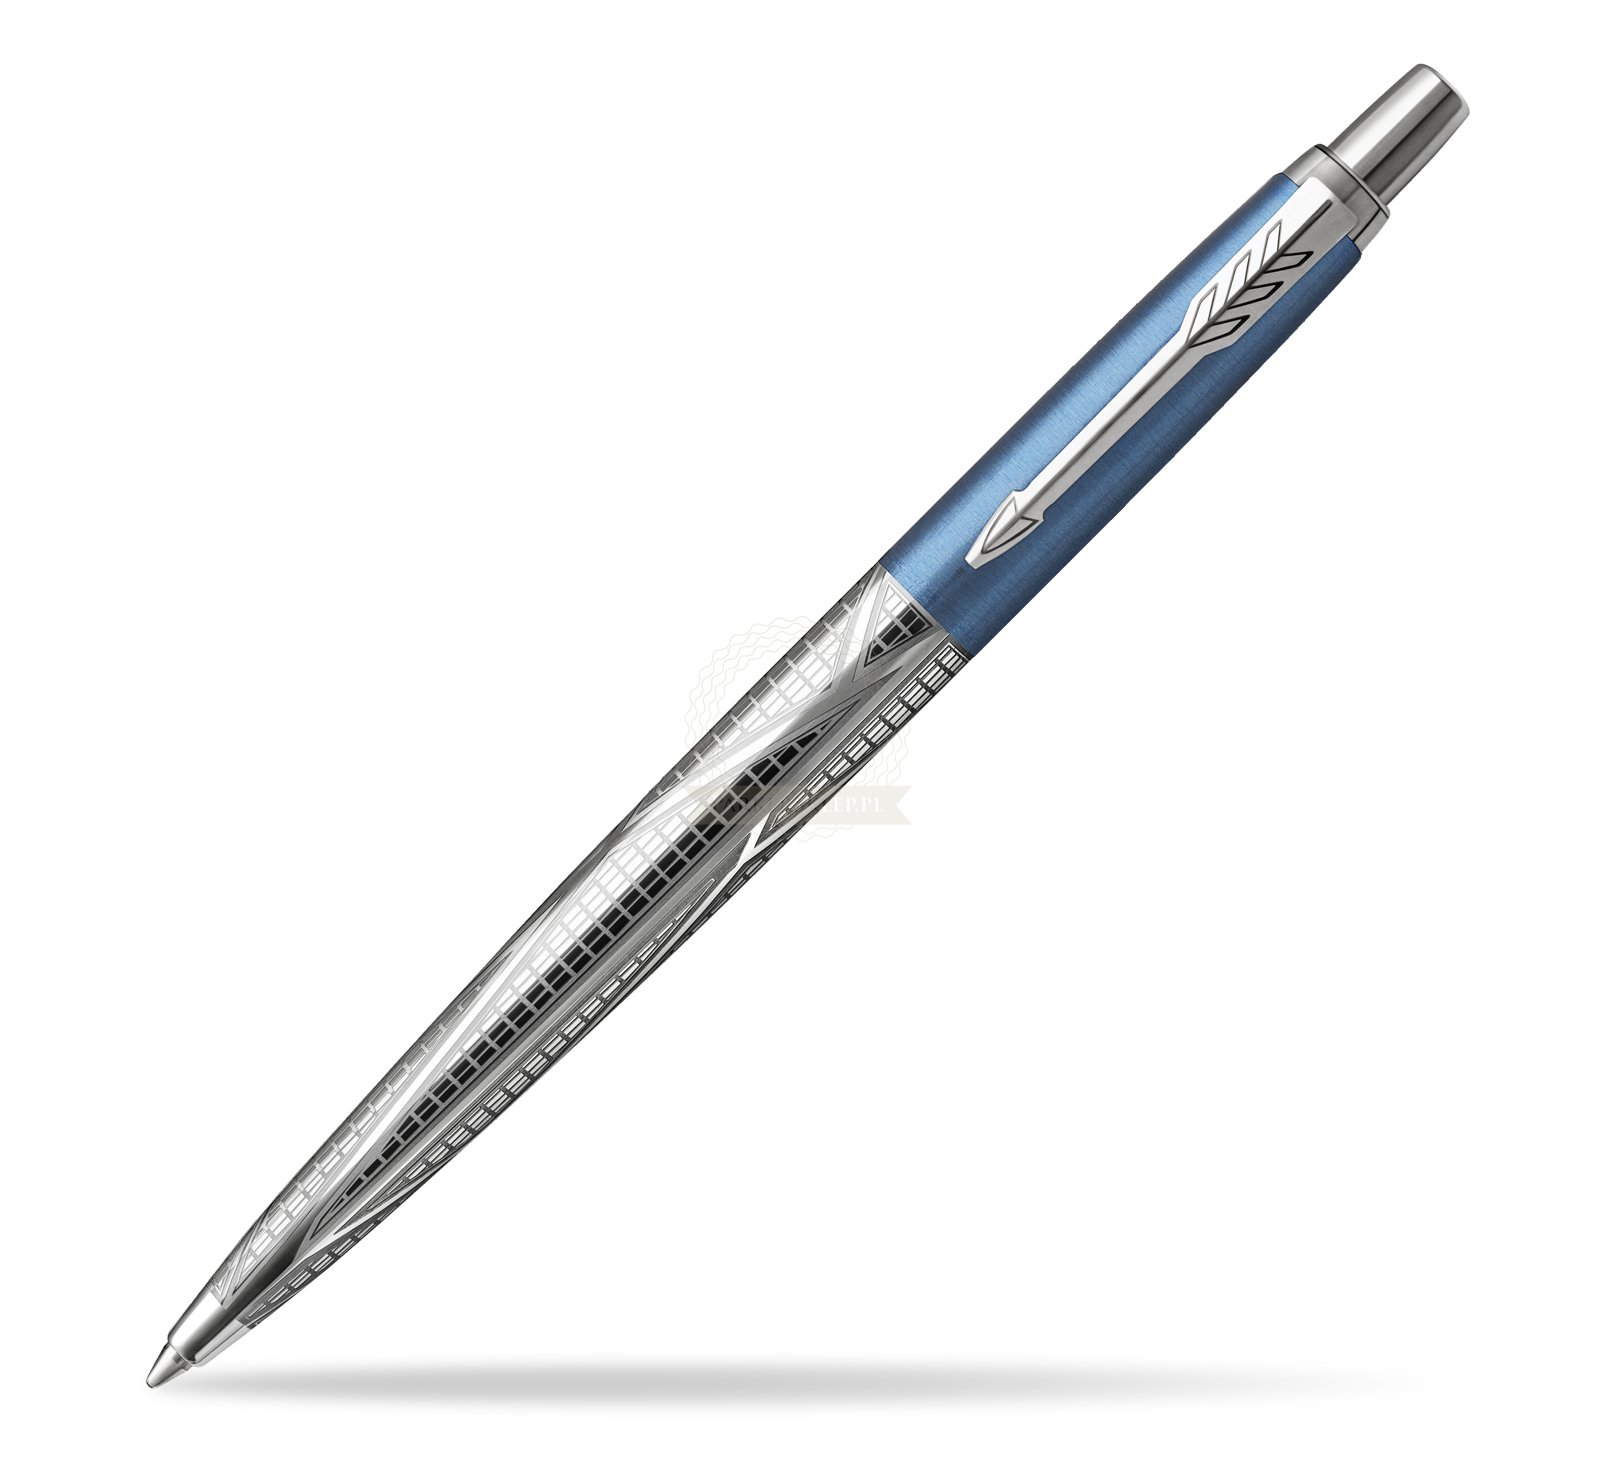 NEW PARKER JOTTER SPECIAL EDITION ARCHITECTURE SKYBLUE MODERN BALLPOINT PEN. 